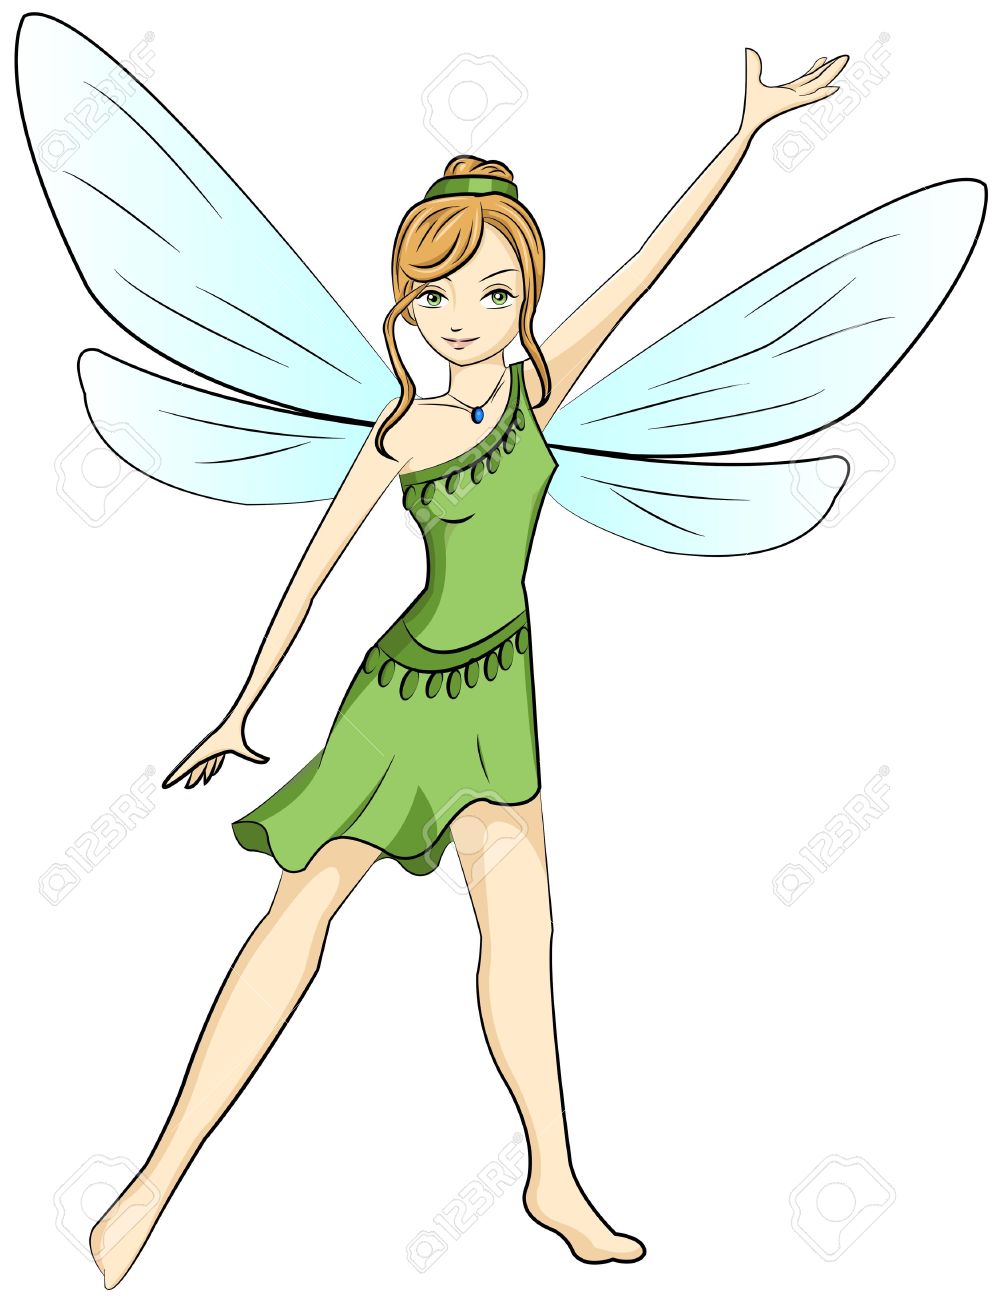 Pixie clipart #10, Download drawings